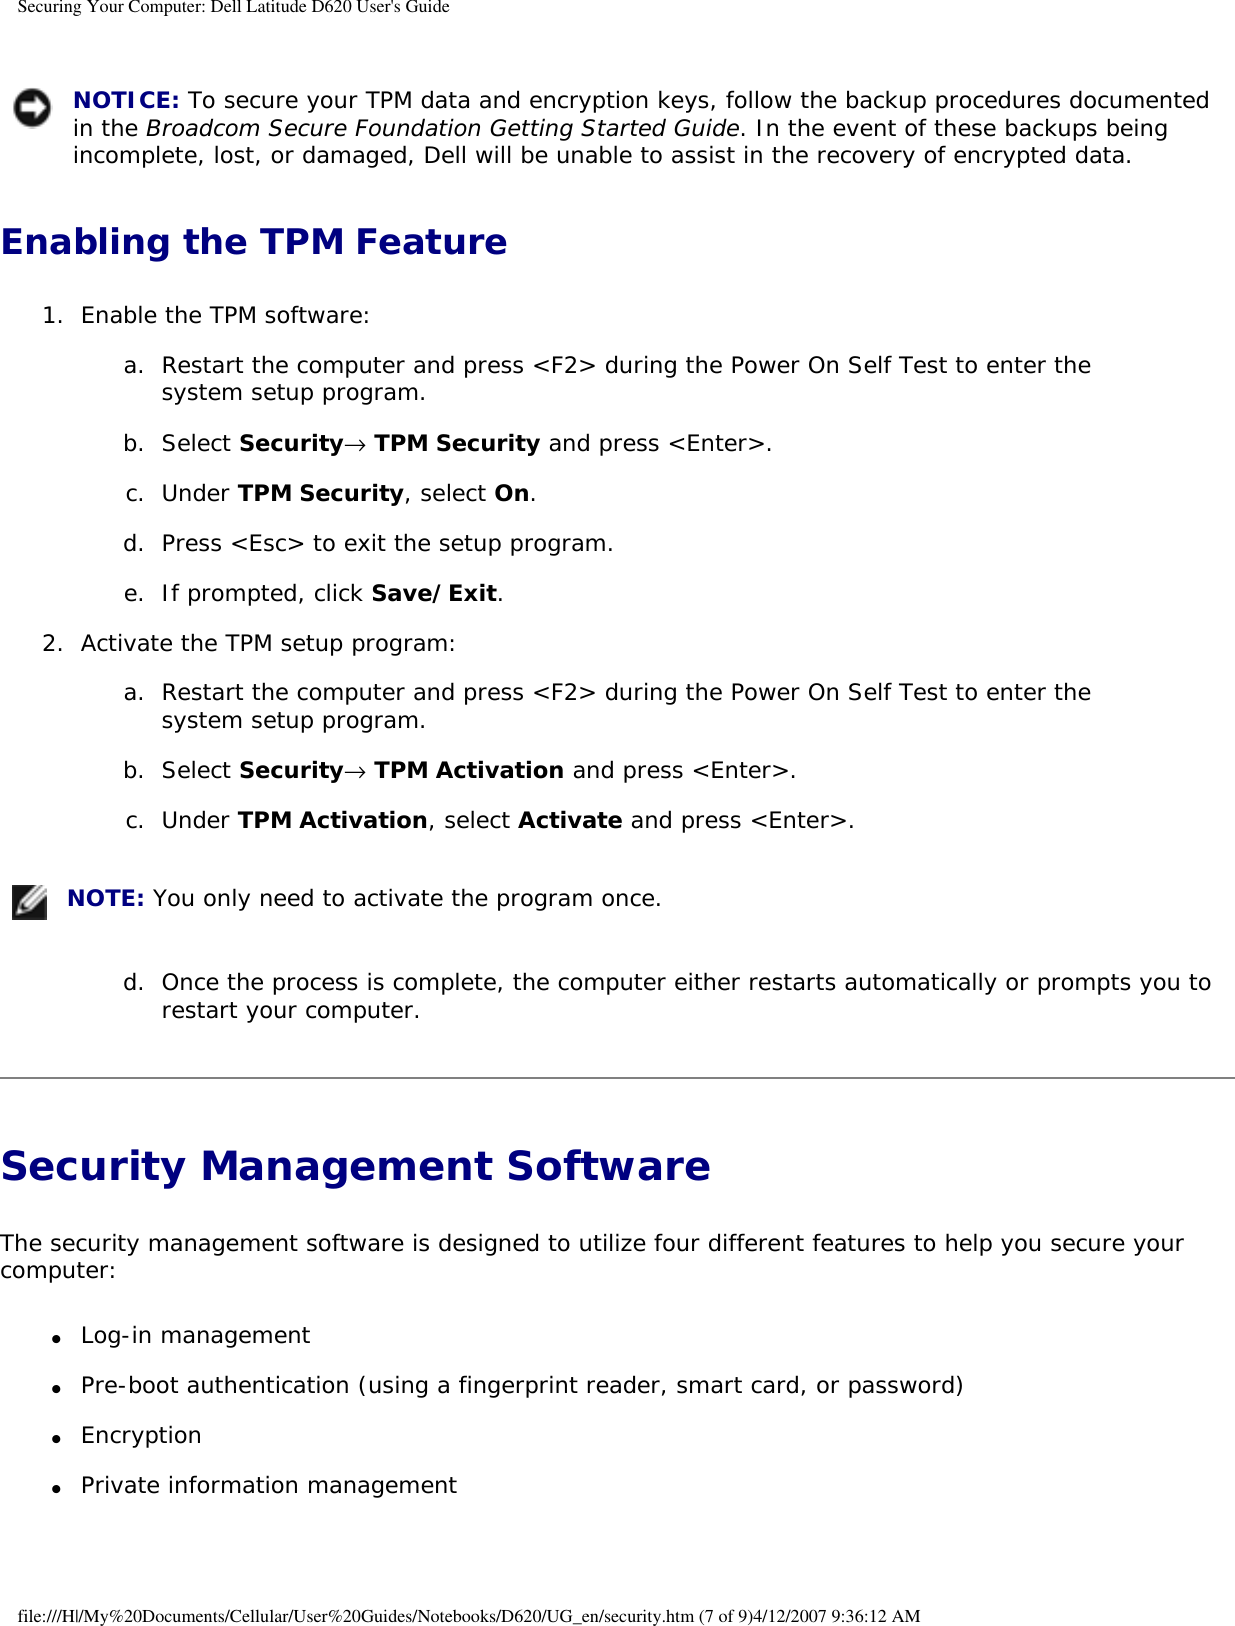 Securing Your Computer: Dell Latitude D620 User&apos;s Guide NOTICE: To secure your TPM data and encryption keys, follow the backup procedures documented in the Broadcom Secure Foundation Getting Started Guide. In the event of these backups being incomplete, lost, or damaged, Dell will be unable to assist in the recovery of encrypted data.Enabling the TPM Feature1.  Enable the TPM software:   a.  Restart the computer and press &lt;F2&gt; during the Power On Self Test to enter the system setup program.   b.  Select Security→ TPM Security and press &lt;Enter&gt;.   c.  Under TPM Security, select On.   d.  Press &lt;Esc&gt; to exit the setup program.   e.  If prompted, click Save/Exit.   2.  Activate the TPM setup program:   a.  Restart the computer and press &lt;F2&gt; during the Power On Self Test to enter the system setup program.   b.  Select Security→ TPM Activation and press &lt;Enter&gt;.   c.  Under TPM Activation, select Activate and press &lt;Enter&gt;.    NOTE: You only need to activate the program once.d.  Once the process is complete, the computer either restarts automatically or prompts you to restart your computer.   Security Management Software The security management software is designed to utilize four different features to help you secure your computer:●     Log-in management  ●     Pre-boot authentication (using a fingerprint reader, smart card, or password)  ●     Encryption  ●     Private information management  file:///H|/My%20Documents/Cellular/User%20Guides/Notebooks/D620/UG_en/security.htm (7 of 9)4/12/2007 9:36:12 AM